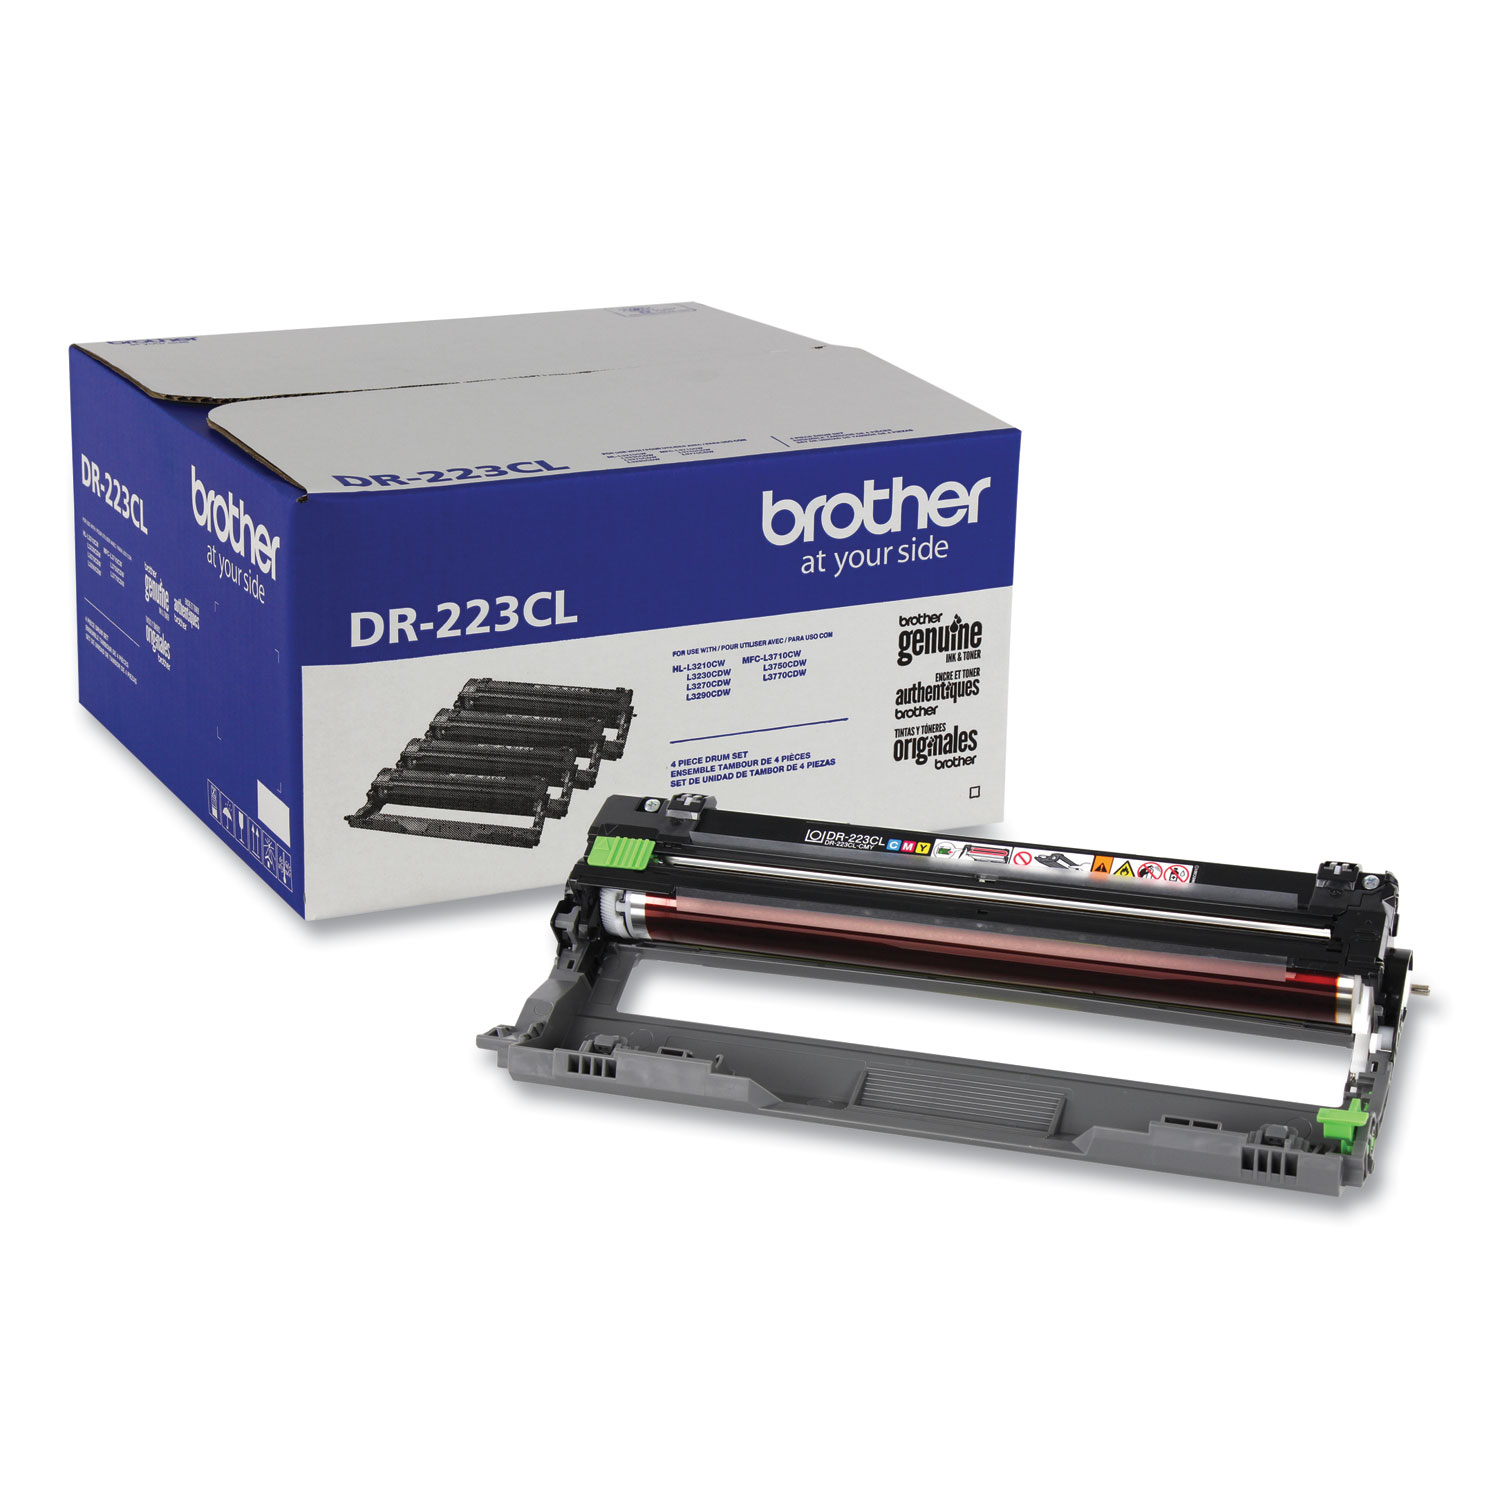 Compatible Toner Cartridges - Set of 4 for use in Brother MFC-L3750CDW